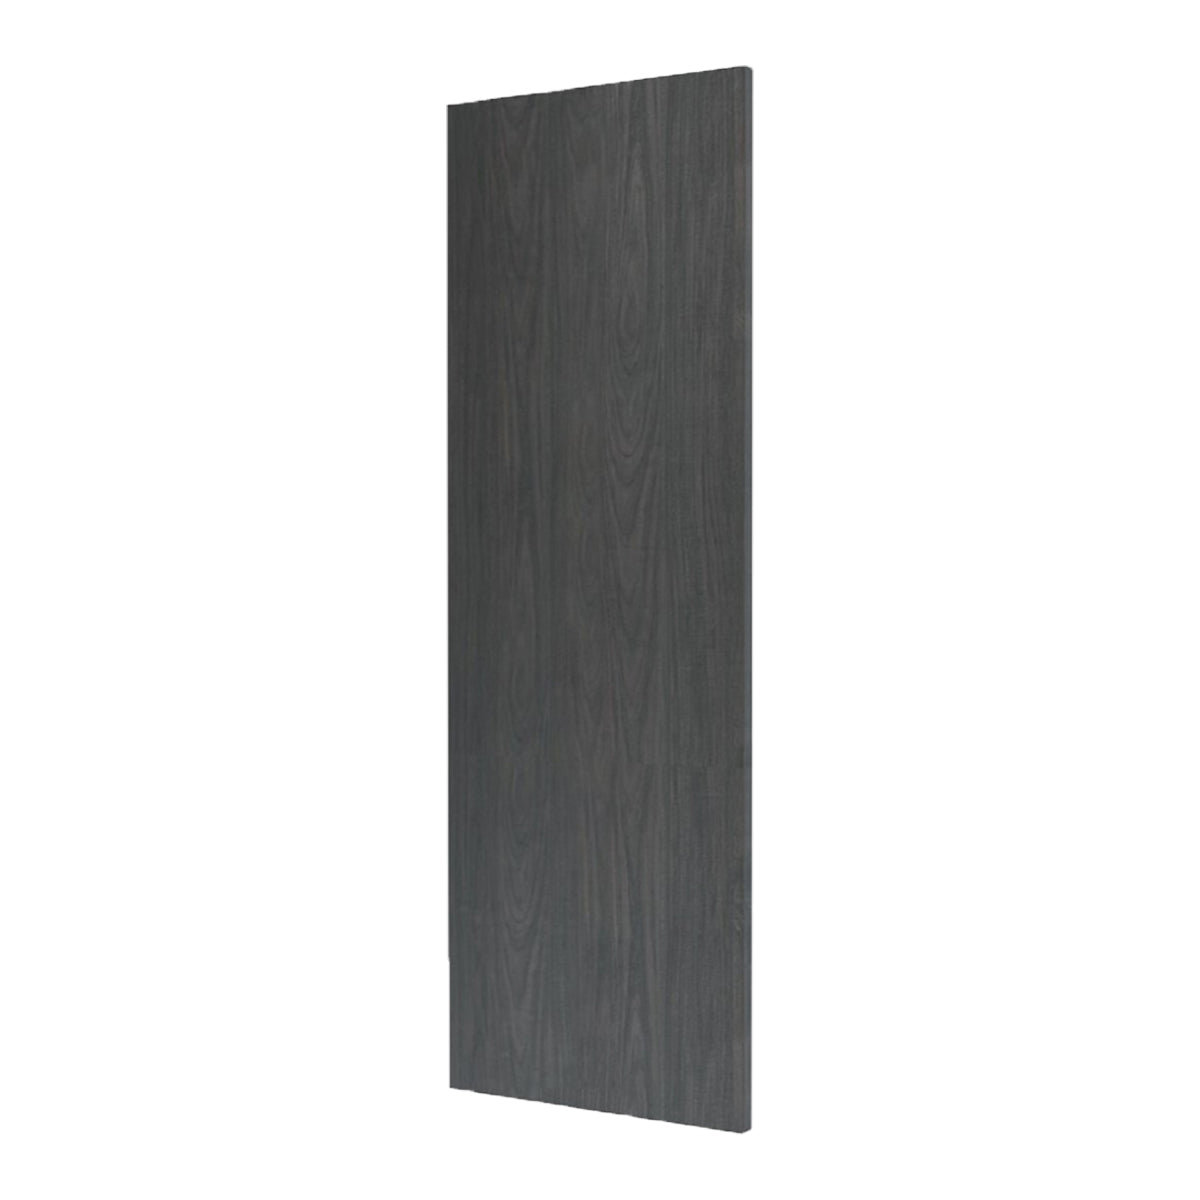 Carbon Marine Slab Style Vanity Cabinet End Panel (36 in W x 0.75 in D x 21 in H)